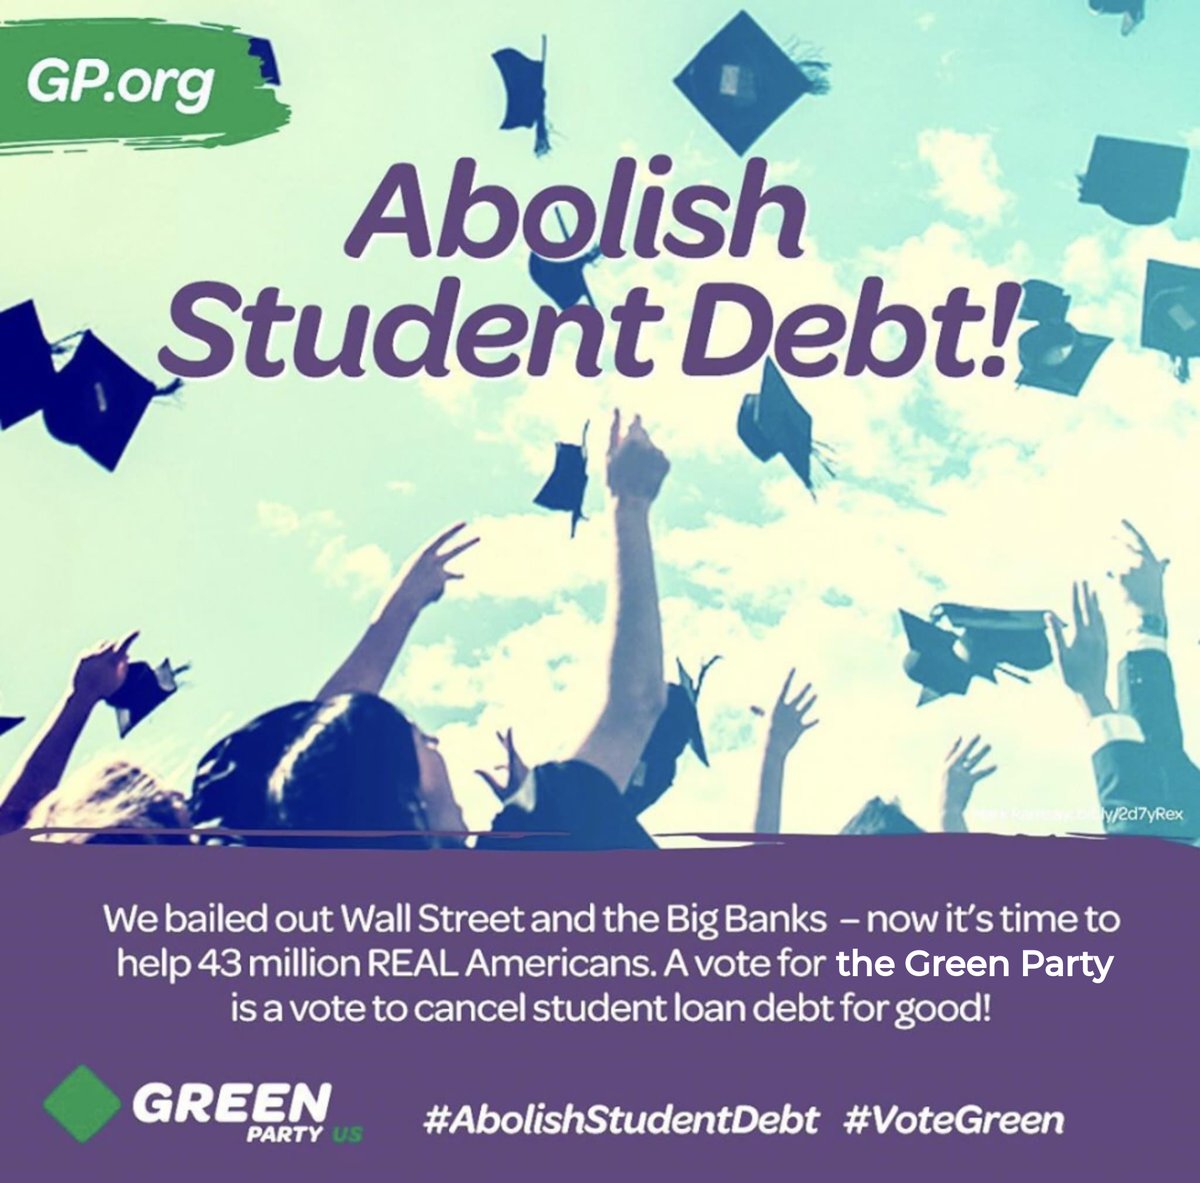 The #GreenParty calls for FULL abolition of ALL #StudentDebt! #AbolishStudentDebt 

Find out about the Green candidates on the ballot in #Pennsylvania for #Election2022 at: greenslate2022.com!